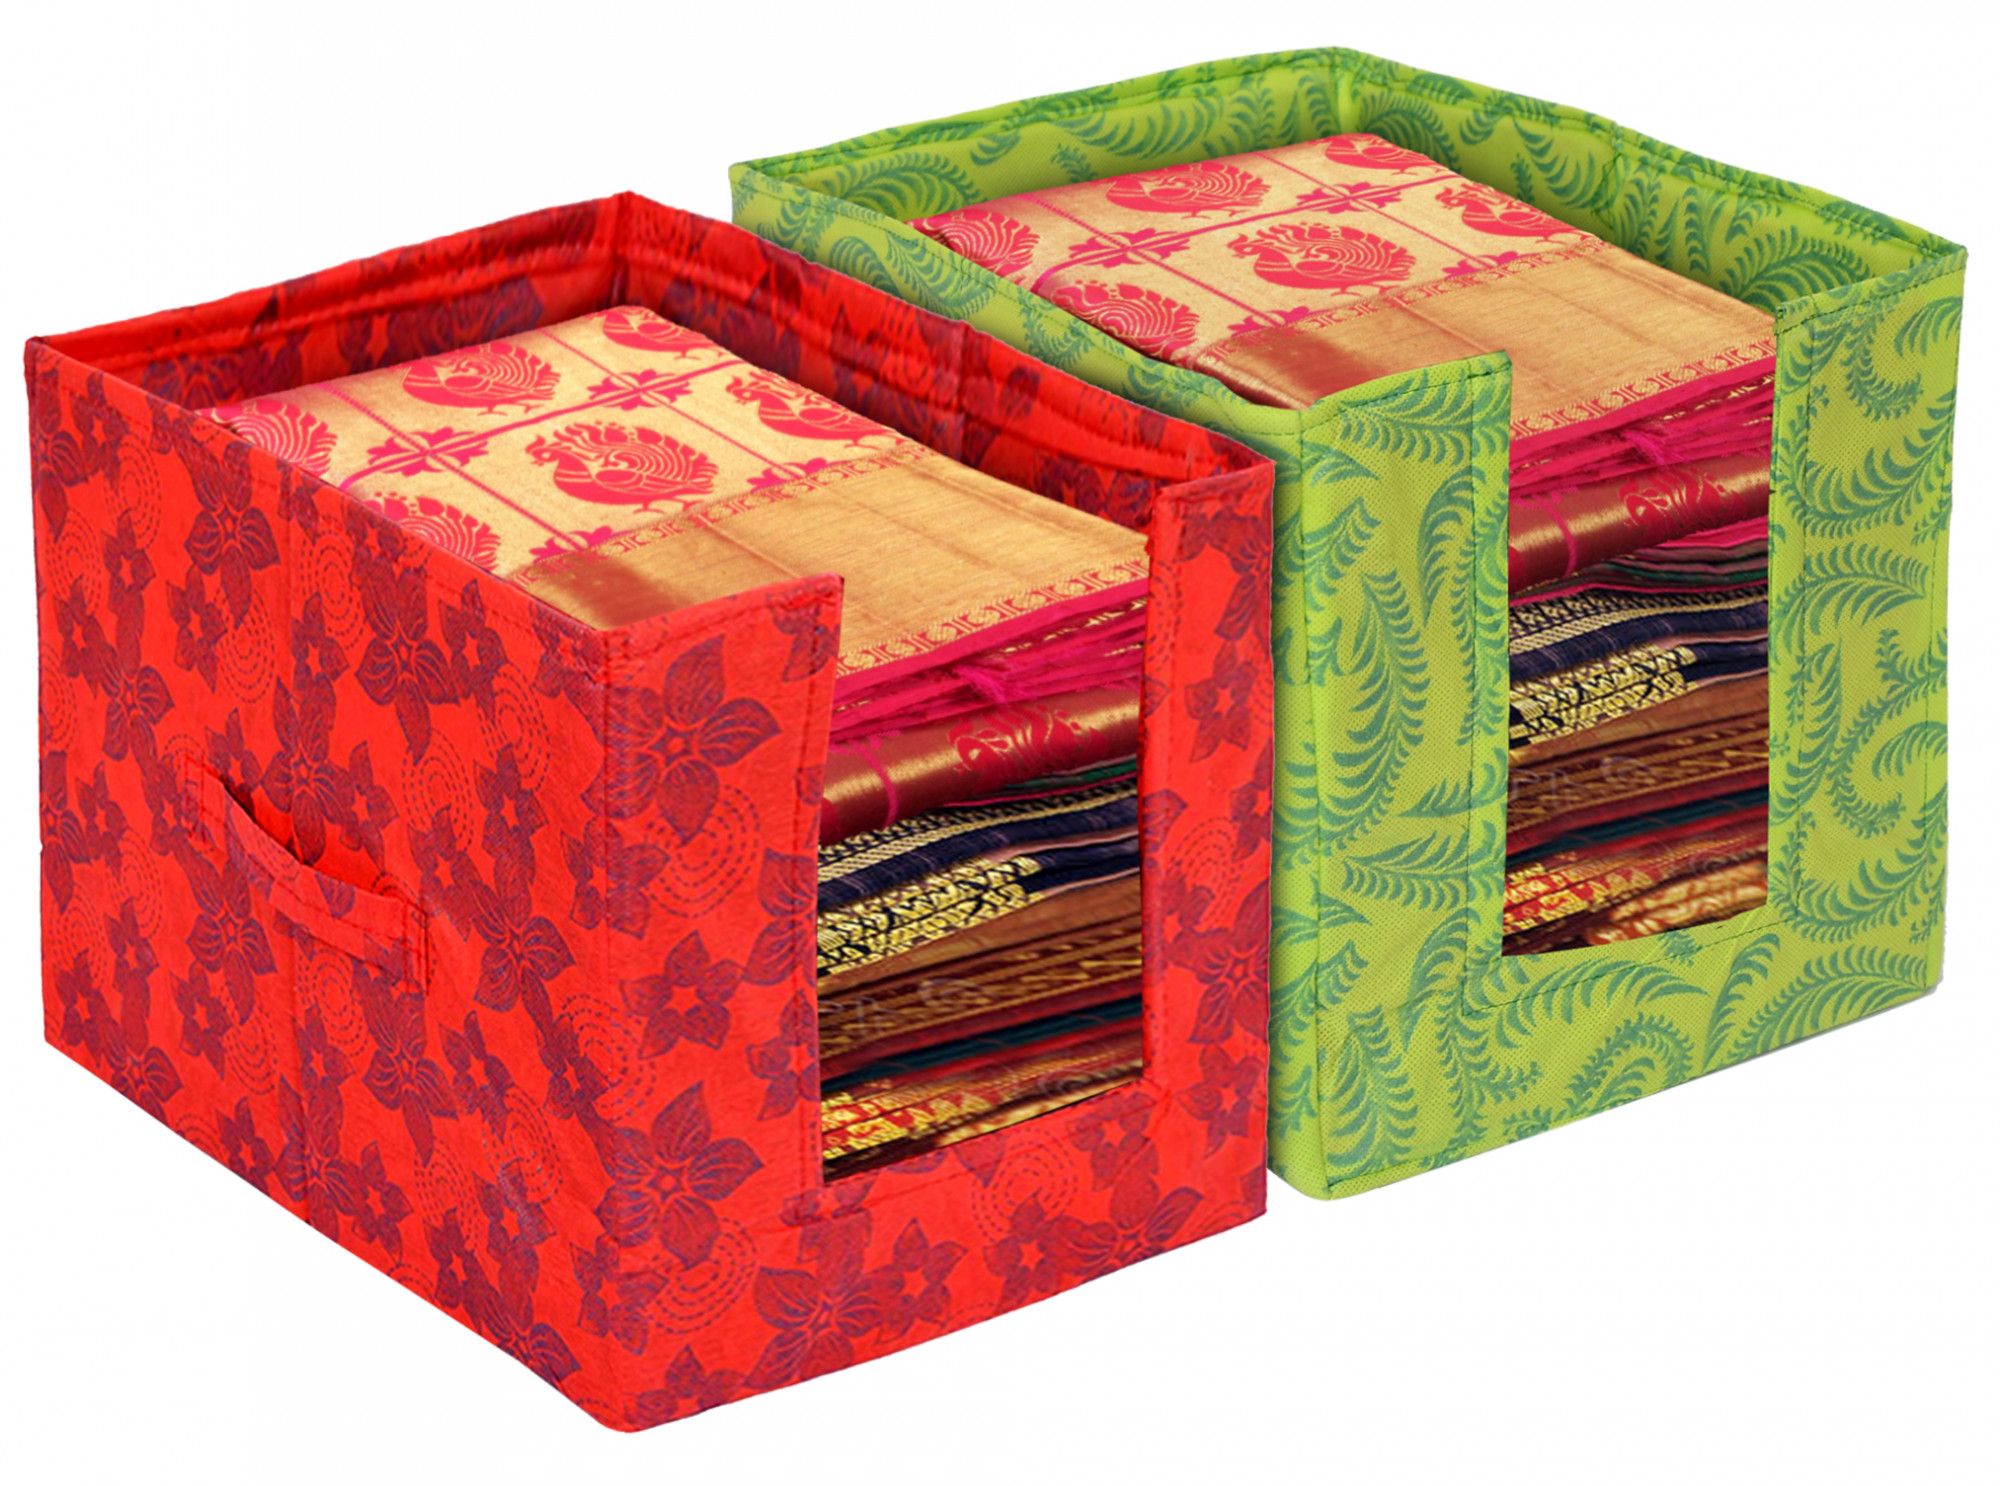 Kuber Industries Metalic Flower Print Foldable Rectangle Cloth Saree Stacker Cloth Wardrobe Organizer- Pack of 2 (Green & Red)